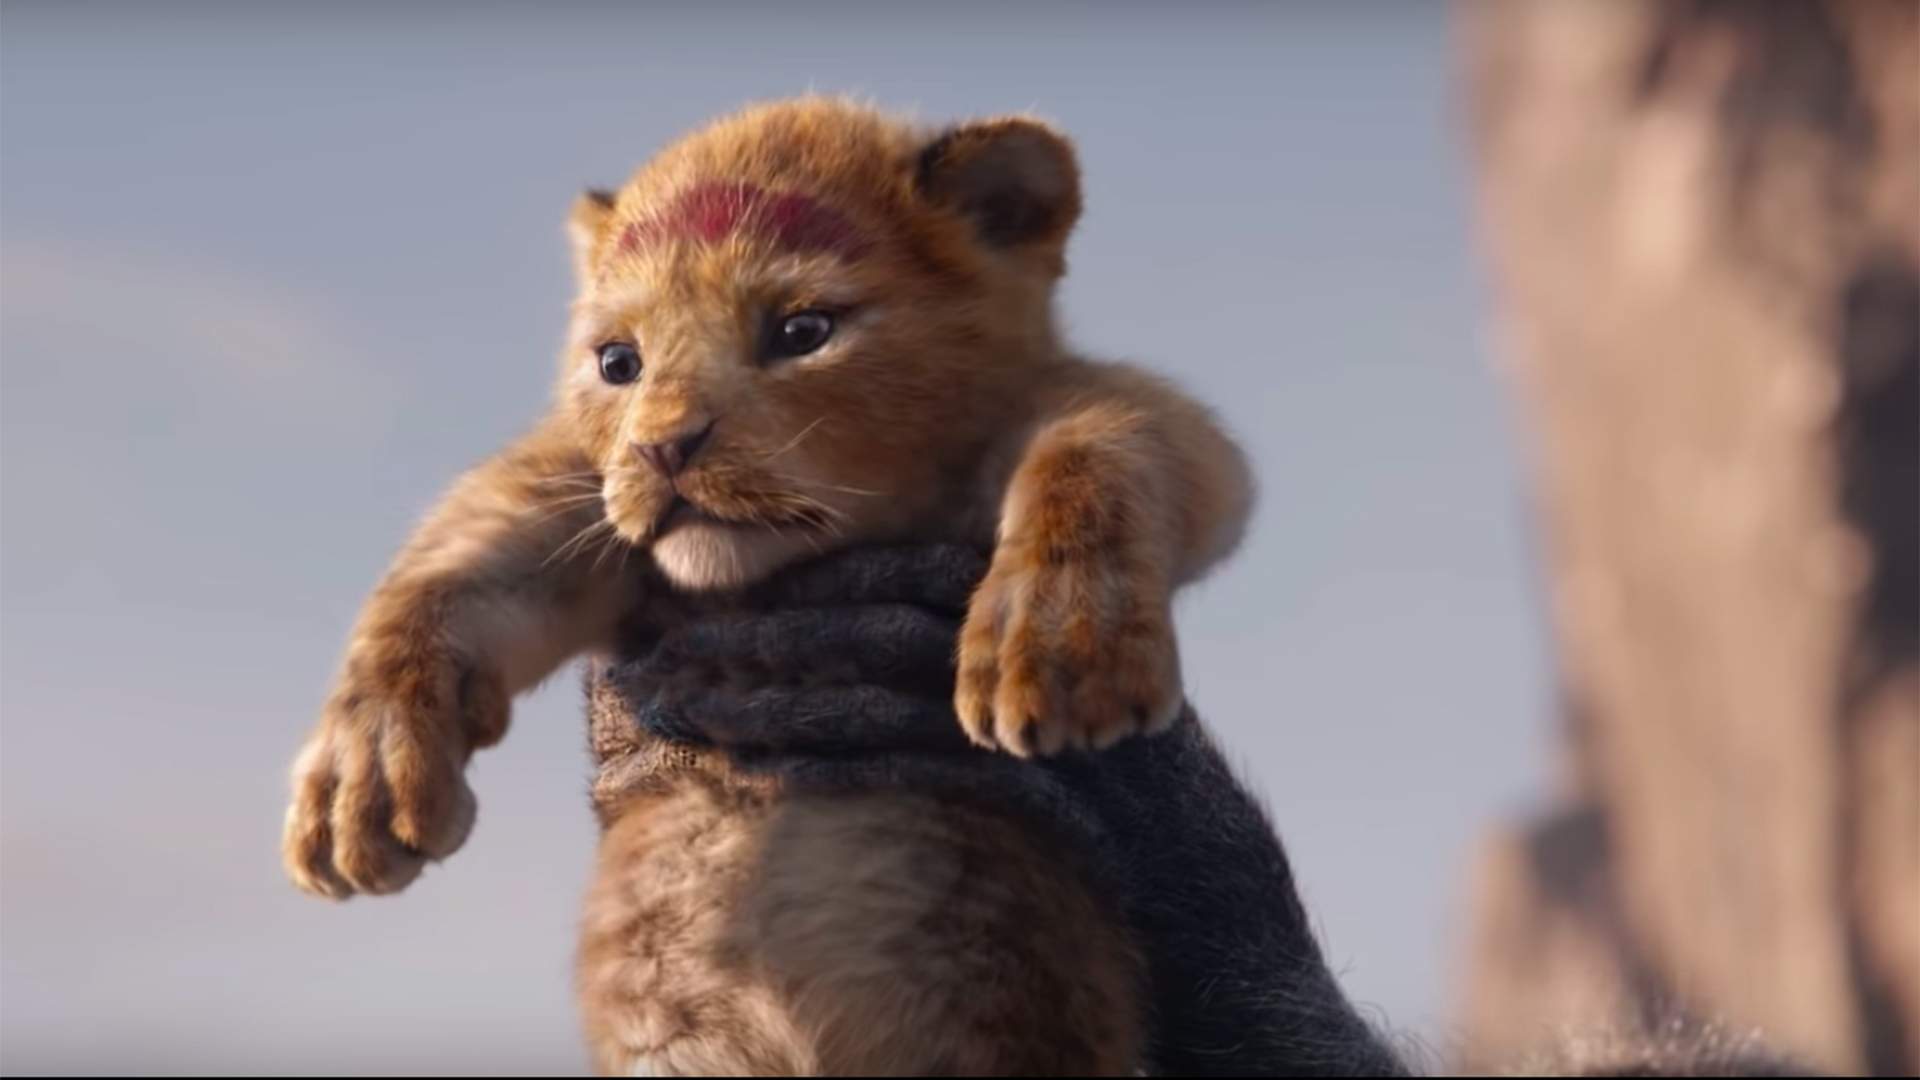 The First Trailer for the New Live-Action Version of 'The Lion King' Will Have You Feeling the Love Tonight